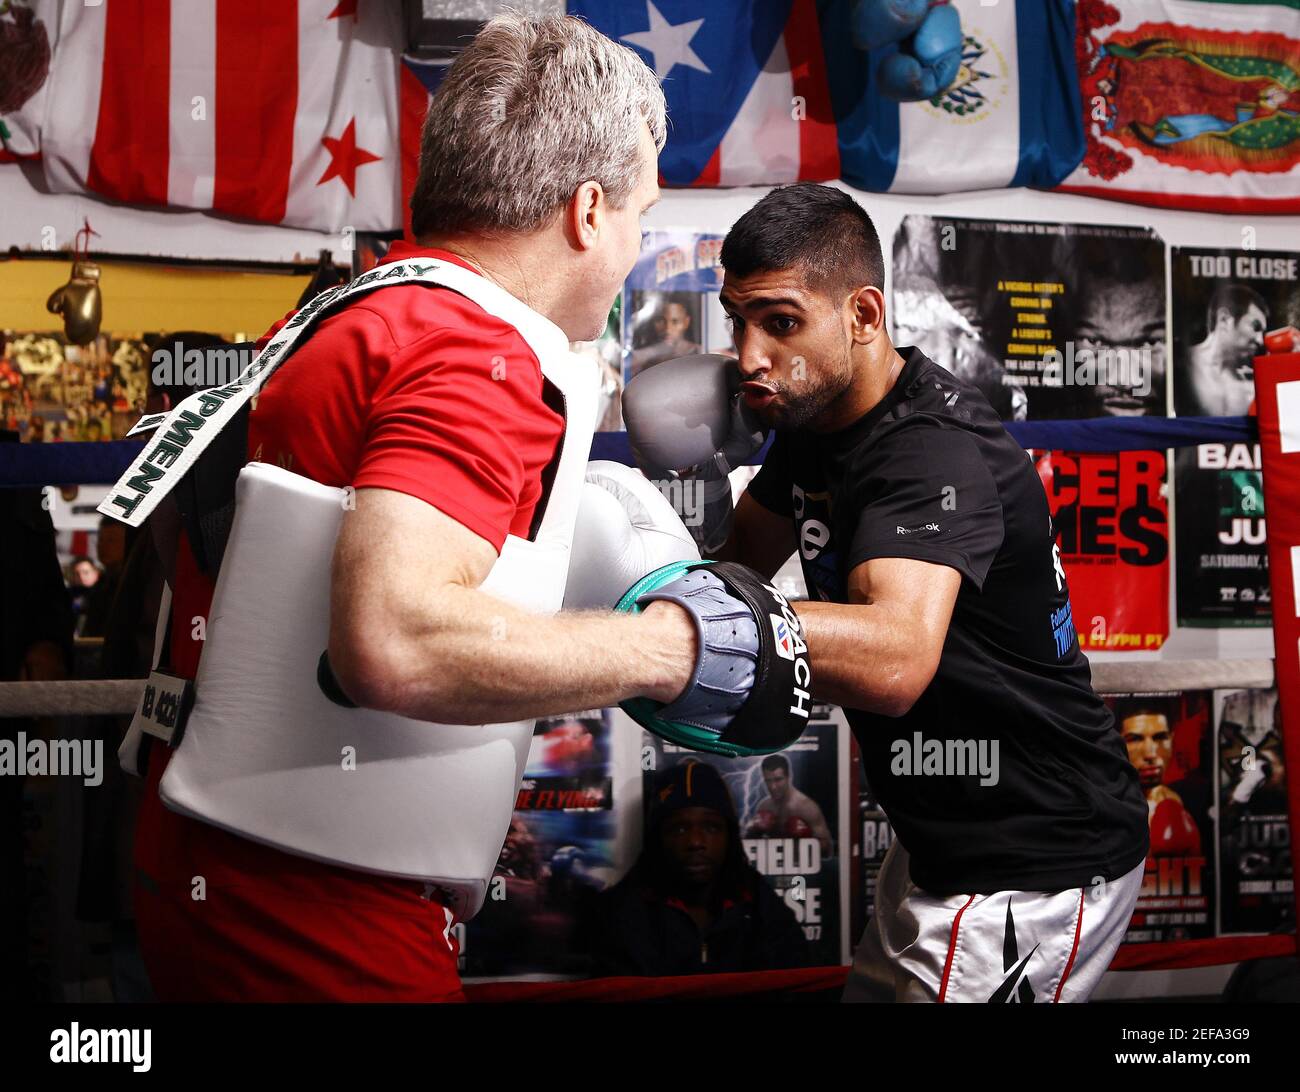 Boxing - Amir Khan Work-Out - 6336 Rosecroft Drive, Fort Washington, MD  20744 - 5/12/11 Amir Khan (R) during a workout with trainer Freddie Roach  Mandatory Credit: Action Images / Andrew Couldridge Livepic Stock Photo -  Alamy